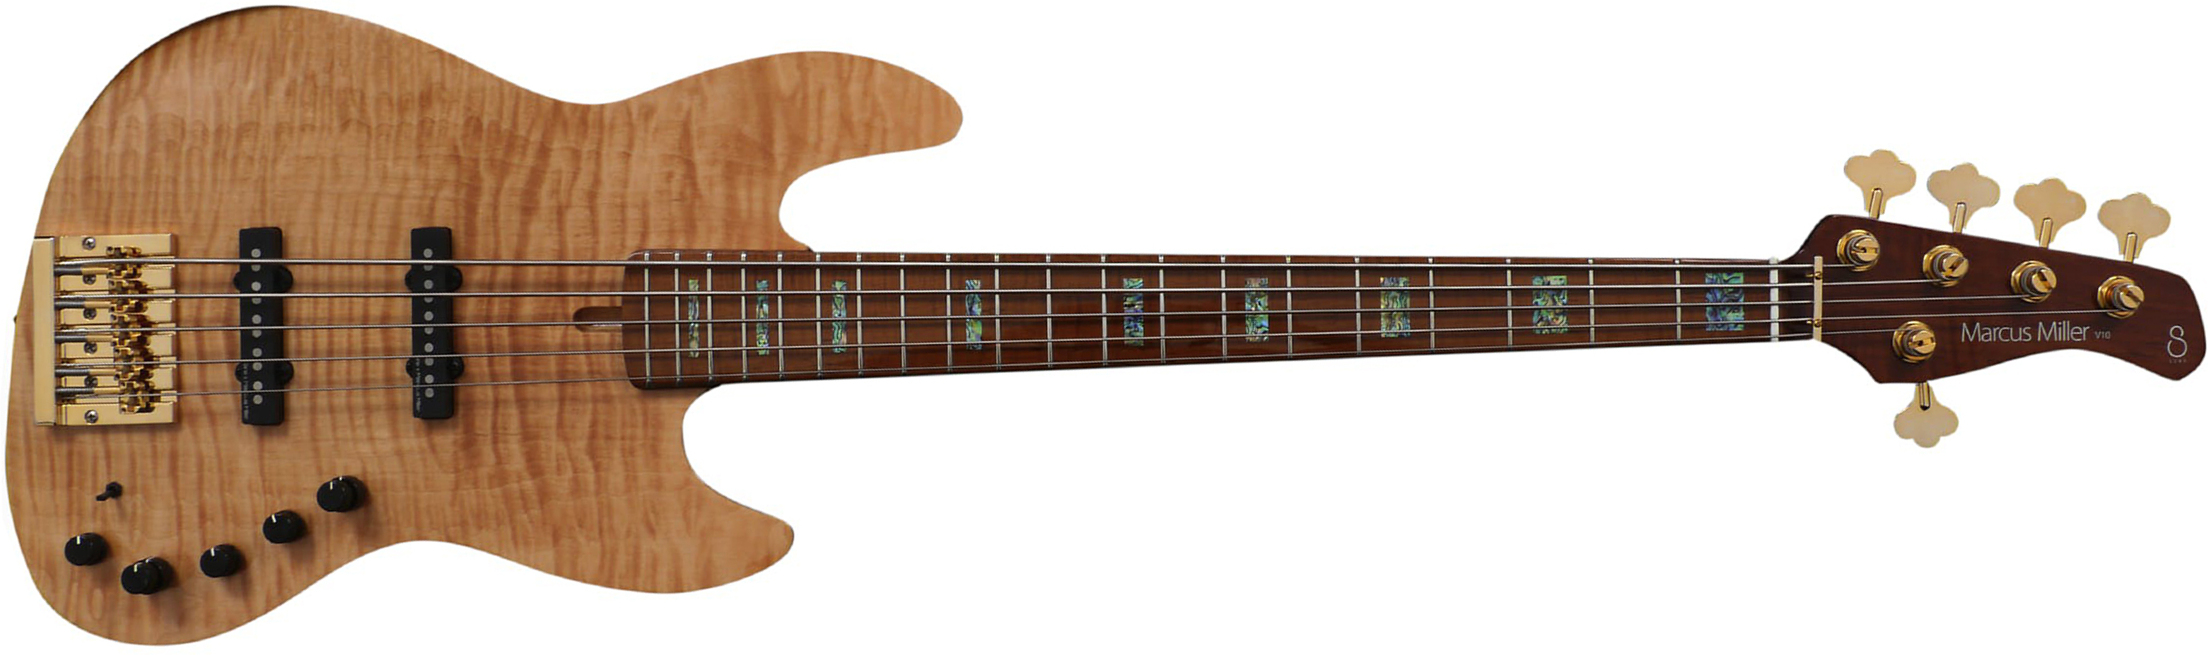 Marcus Miller V10dx 5st 5c Active Mn - Natural - Solid body electric bass - Main picture